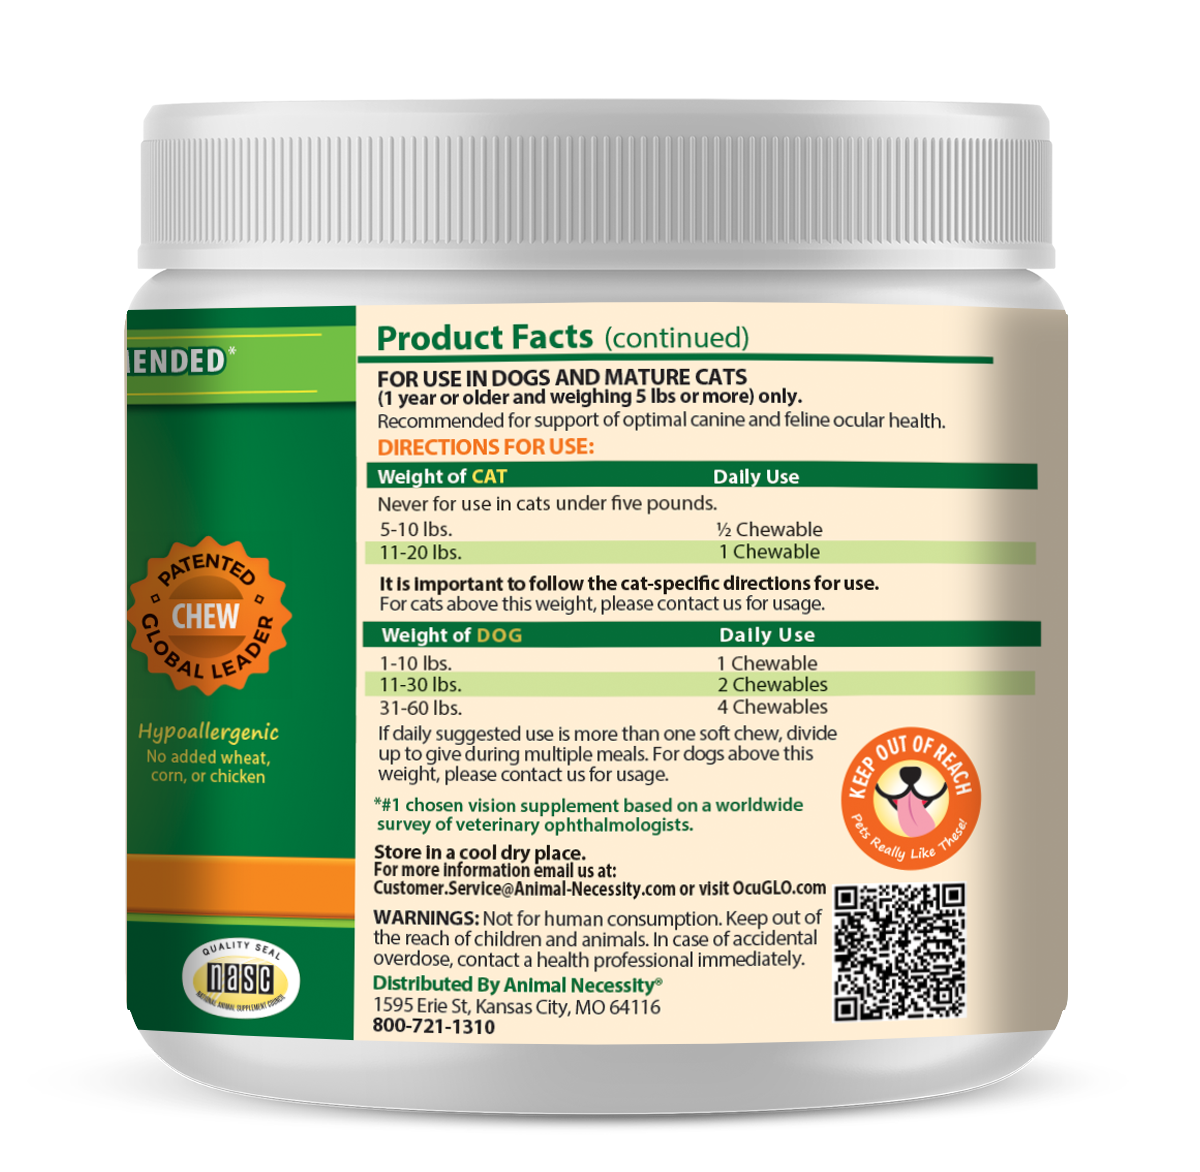 Ocu-GLO® Chewables (30ct) Canister for Dogs & Cats